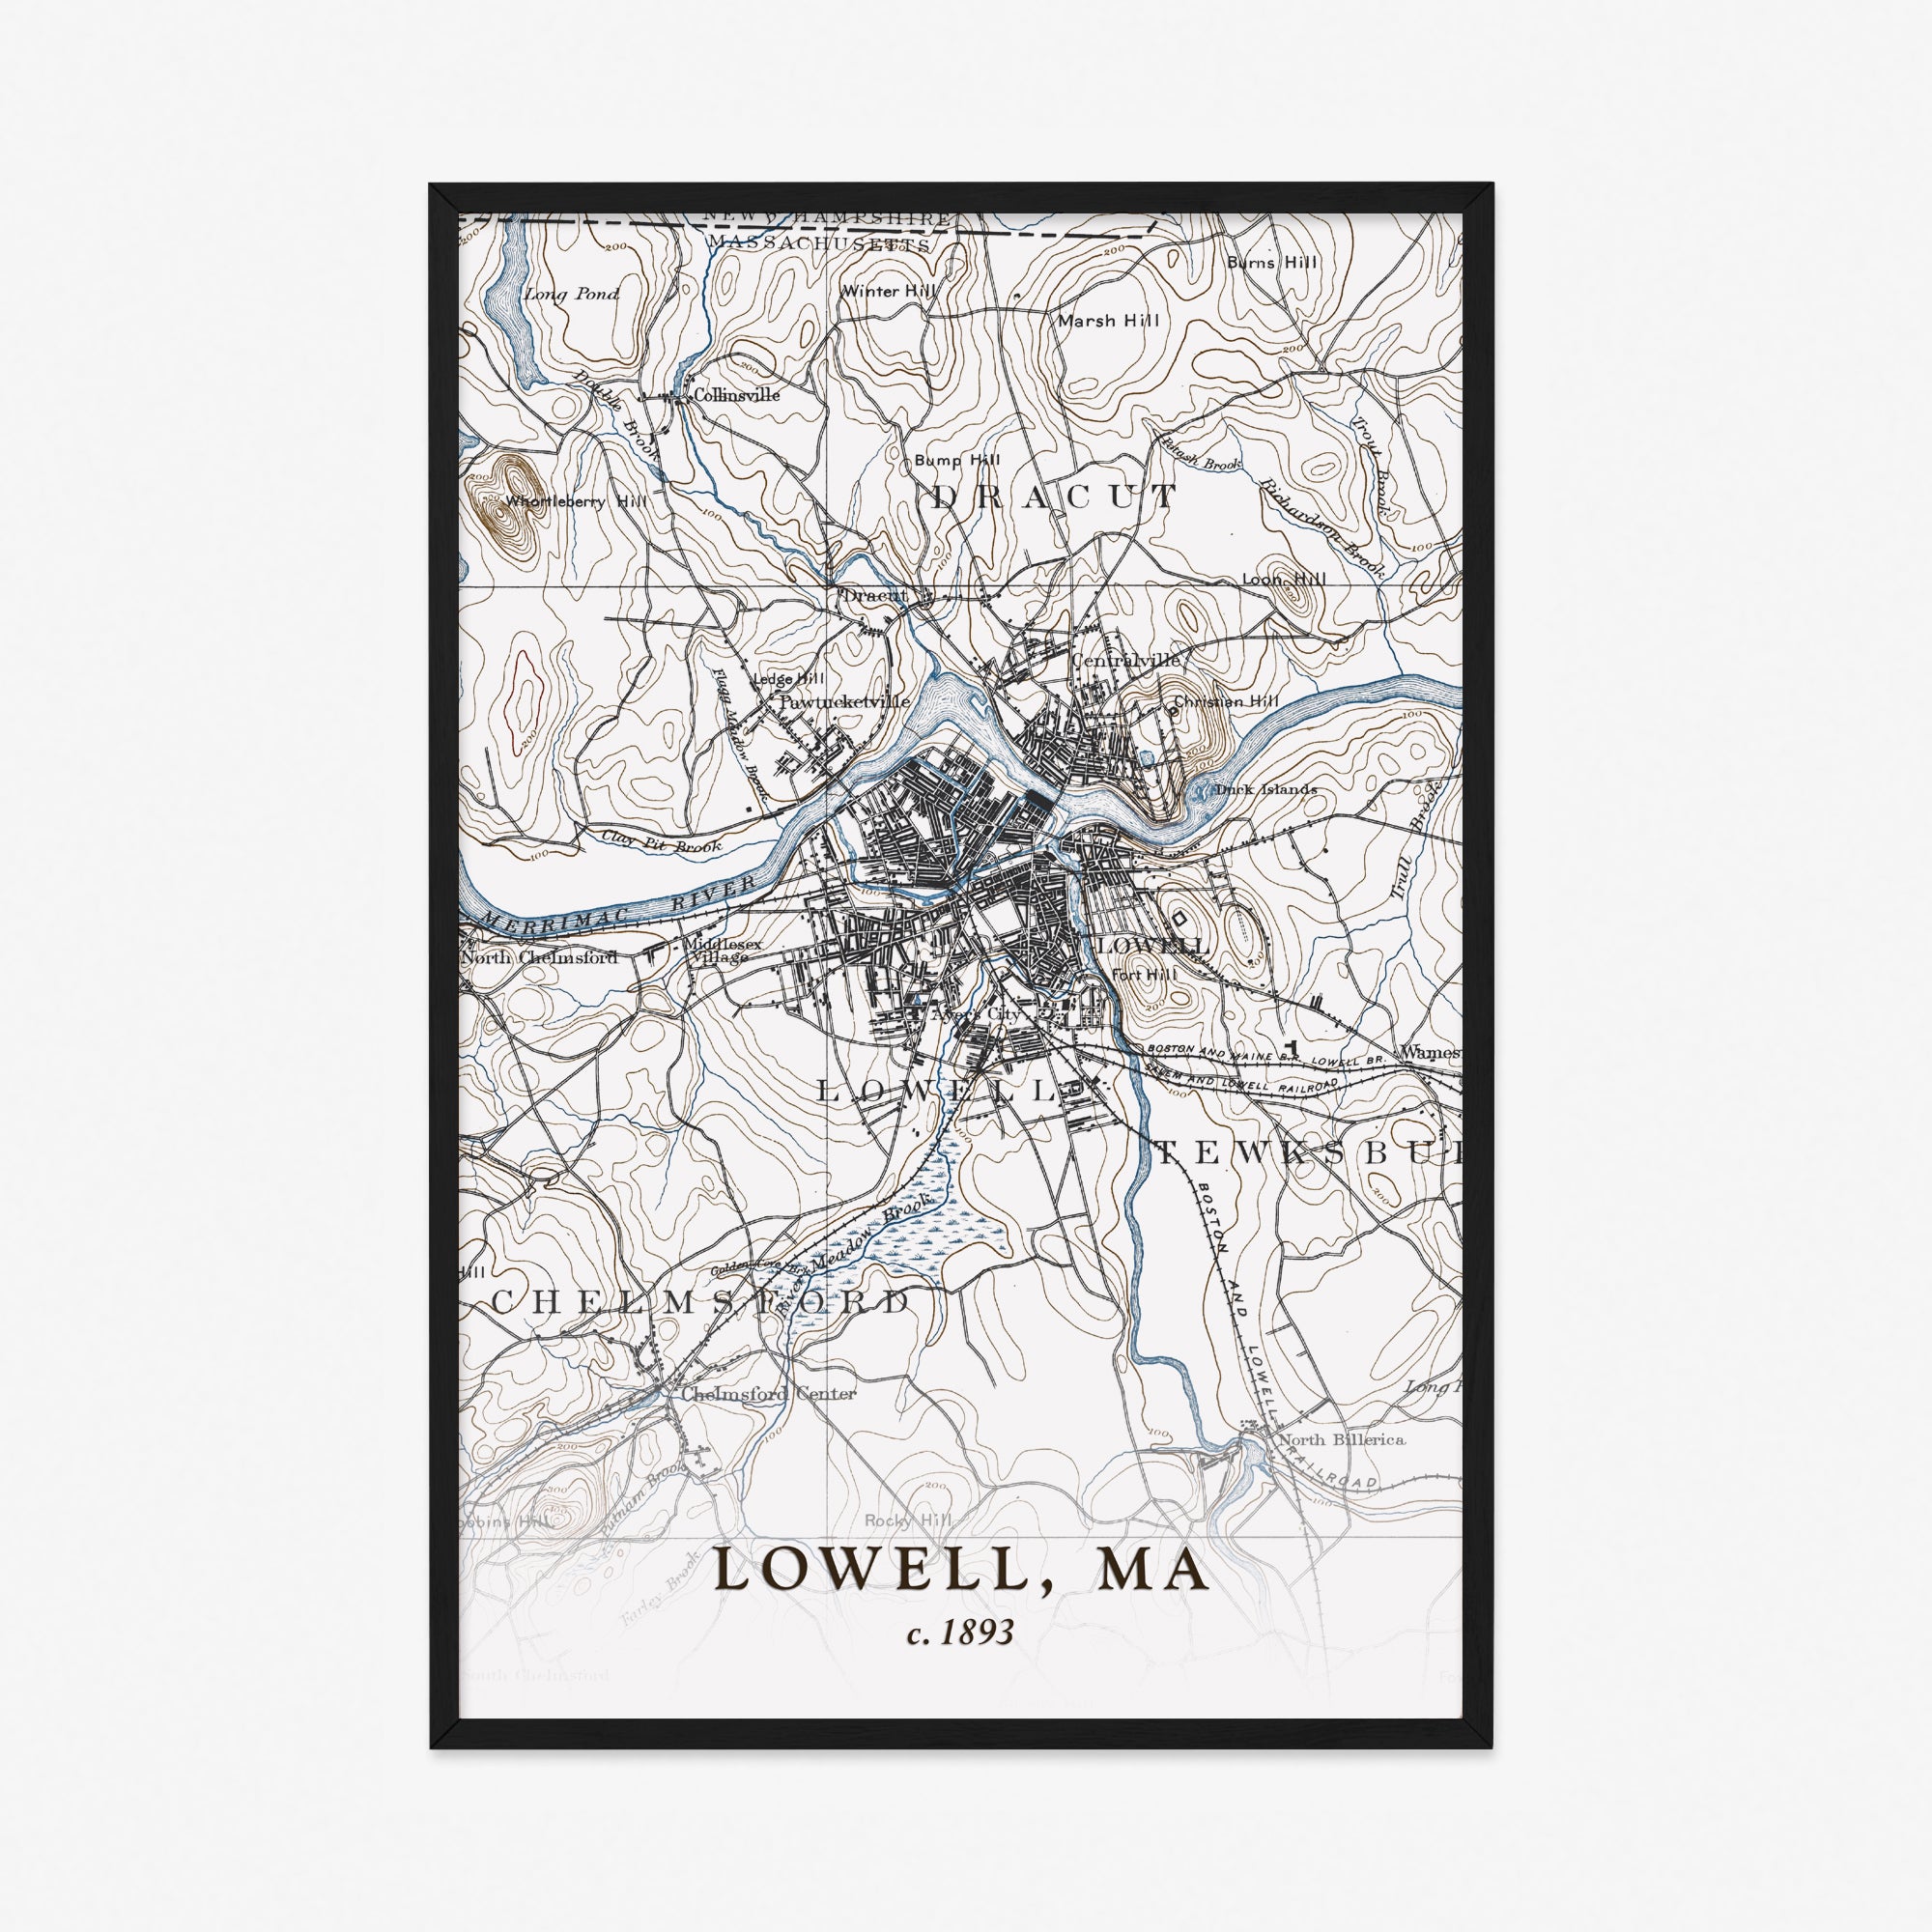 Lowell, MA - 1893 Topographic Map